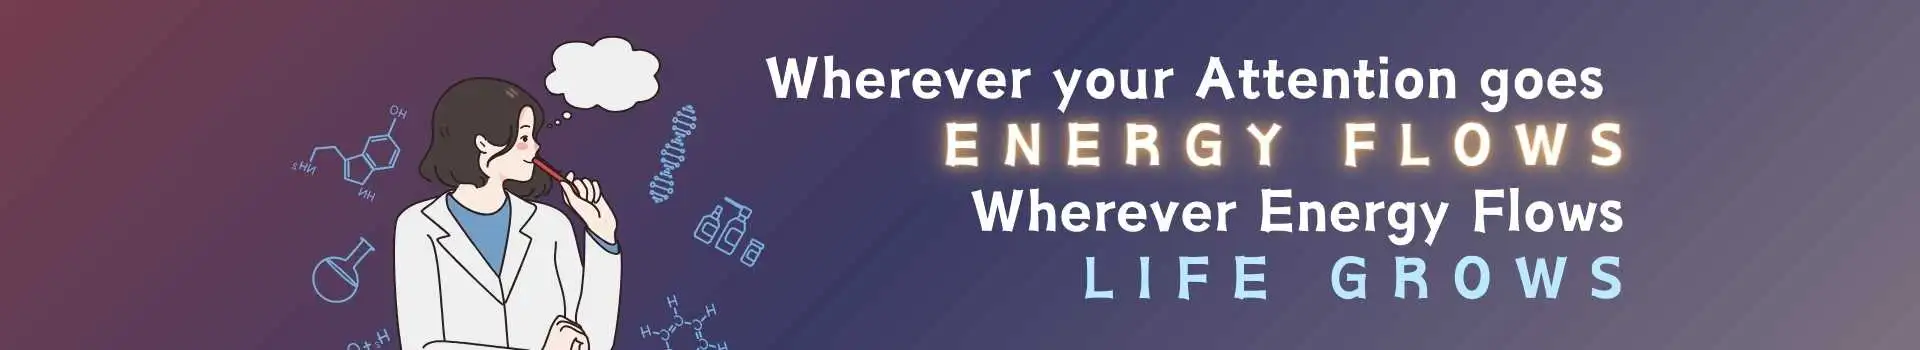 Wherever your attention goes, energy flows; wherever energy flows, life grows ytthumbnail